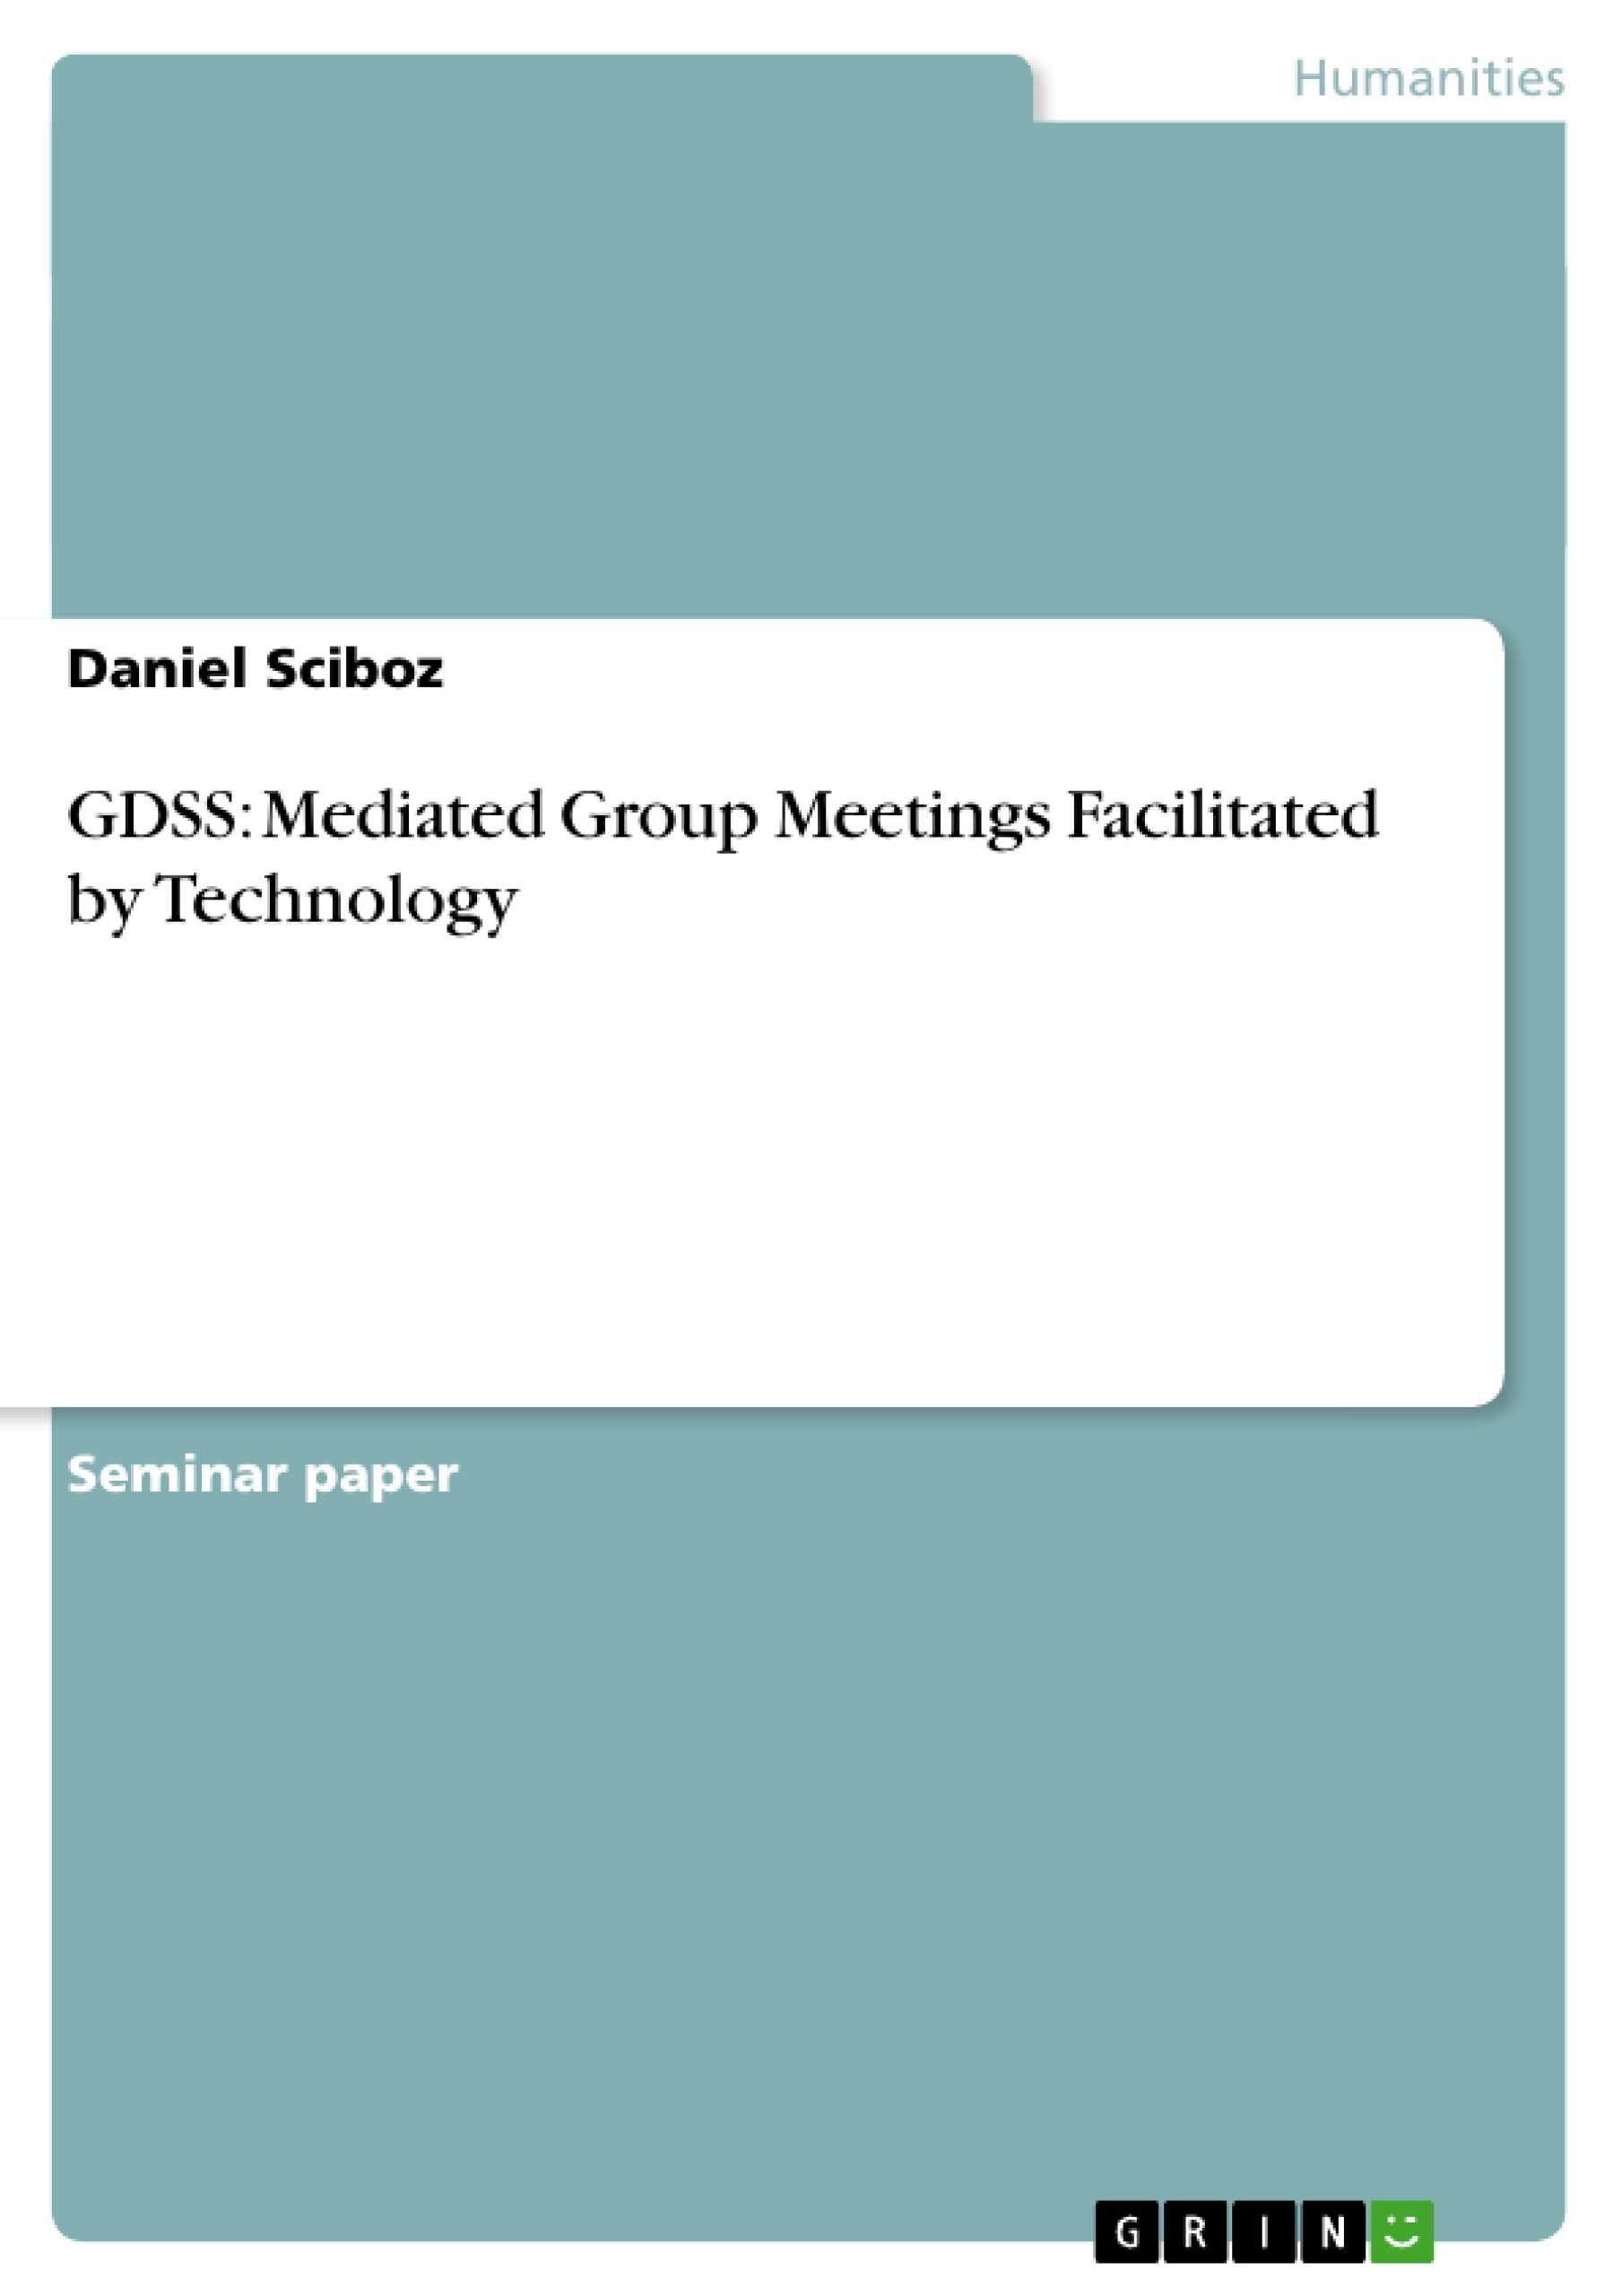 Title: GDSS: Mediated Group Meetings Facilitated by Technology